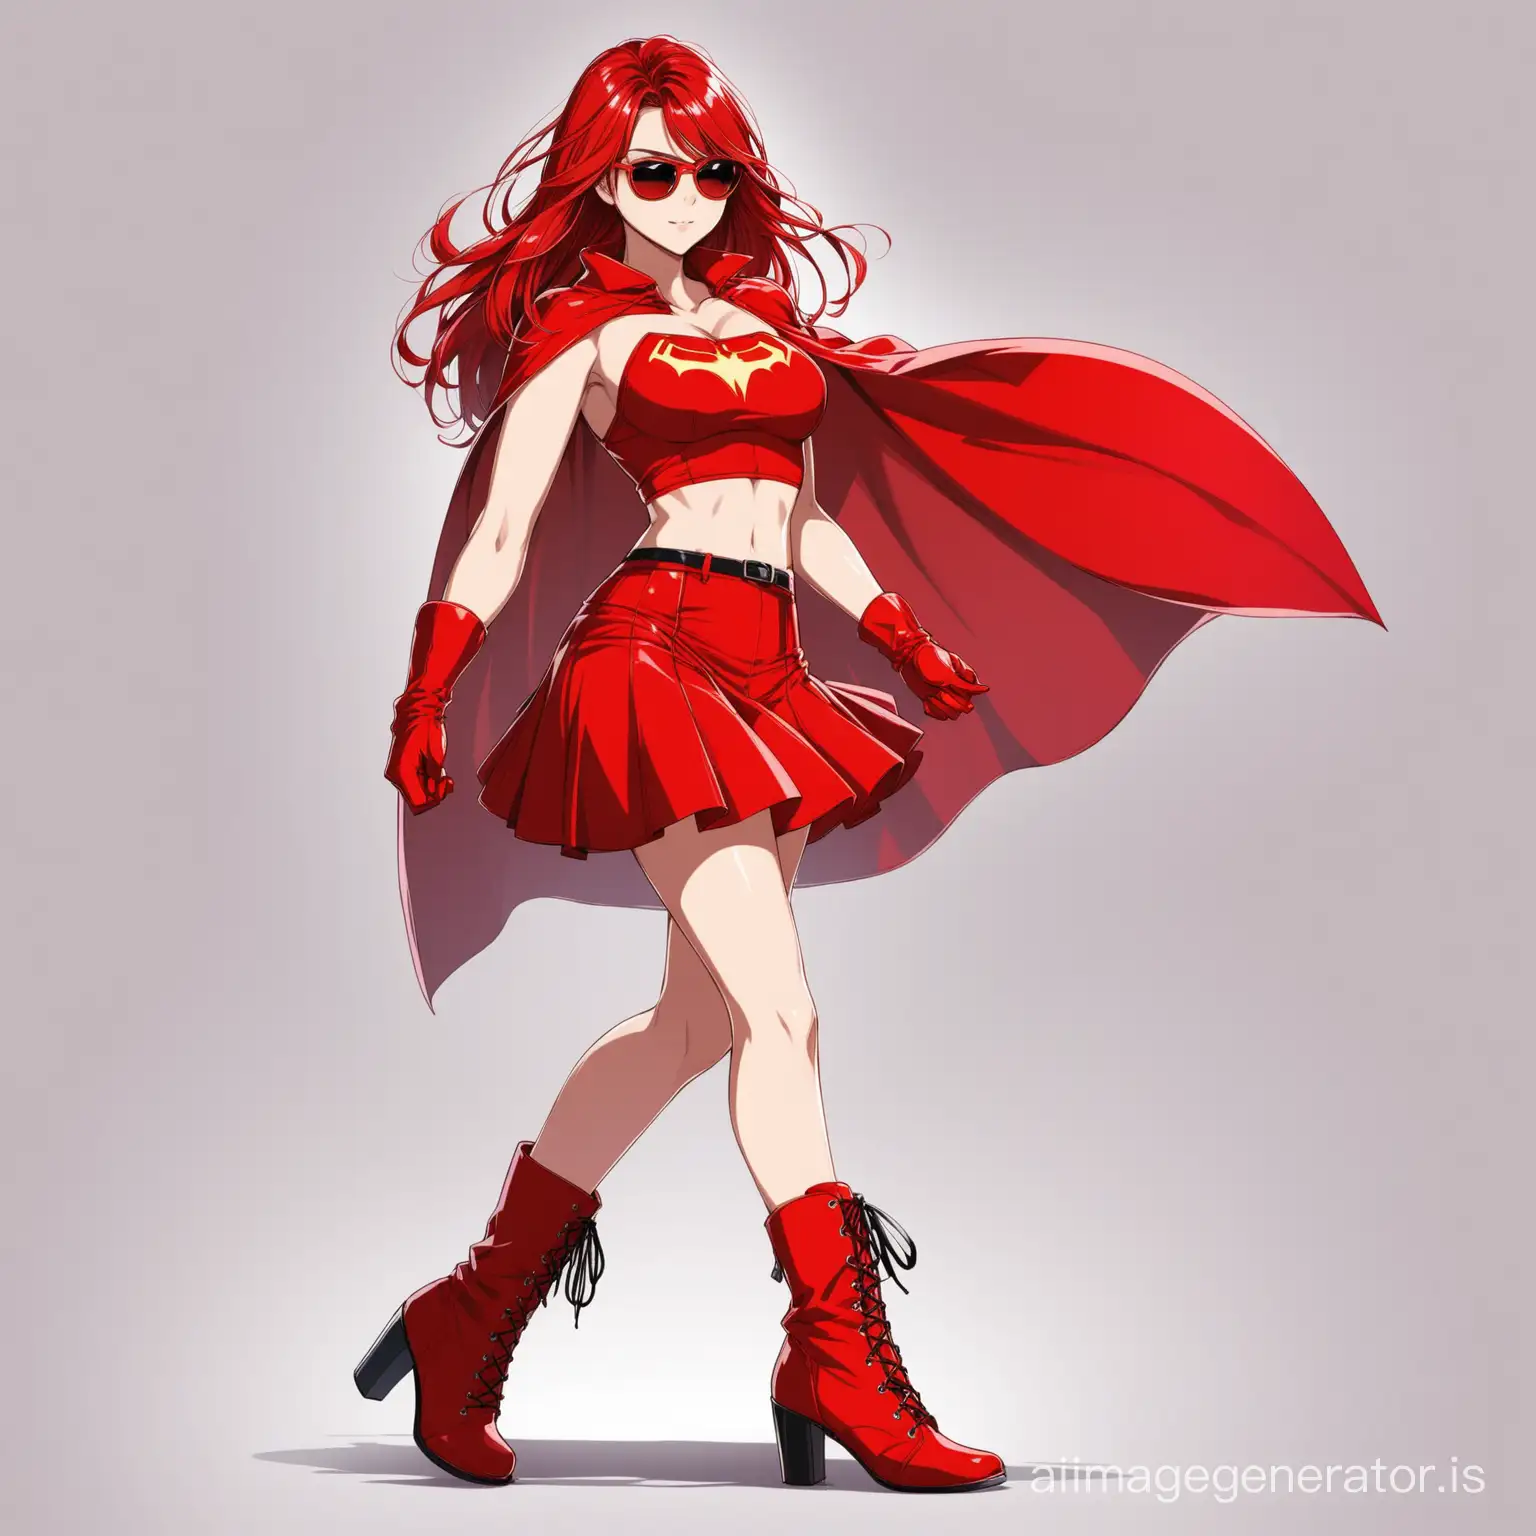 hot anime girl in a modern and cool red croptop, red skirt, a pair of red gloves, a pair of red boots heels wearing a red superhero cape reaching her boots along with a pair of red sunglasses